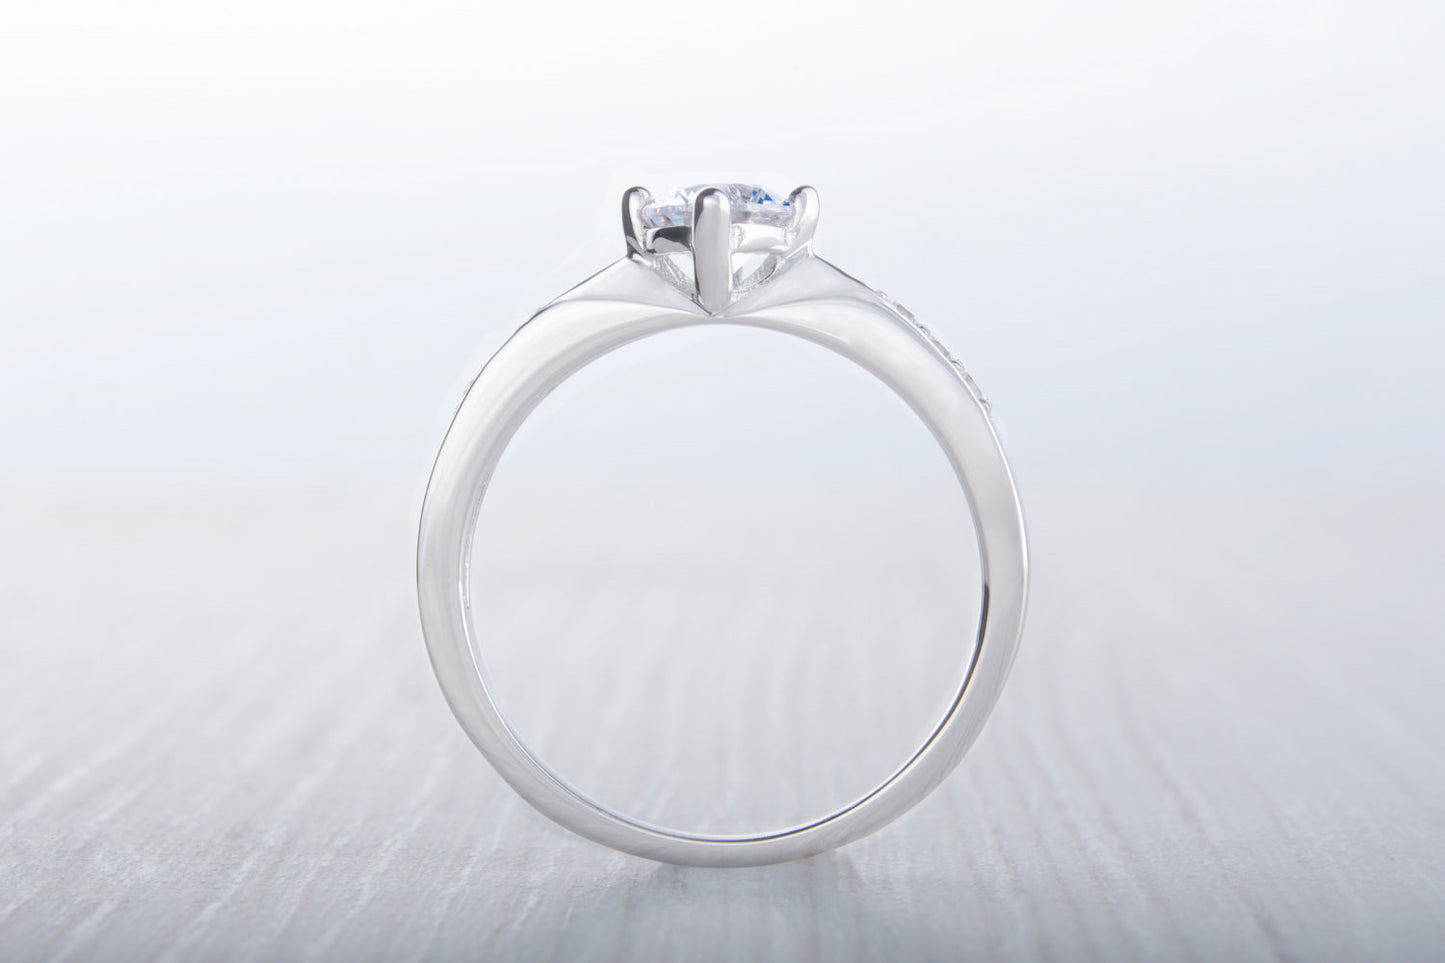 Genuine White Moissanite solitaire ring - Available in sterling silver or white gold - engagement ring - wedding ring